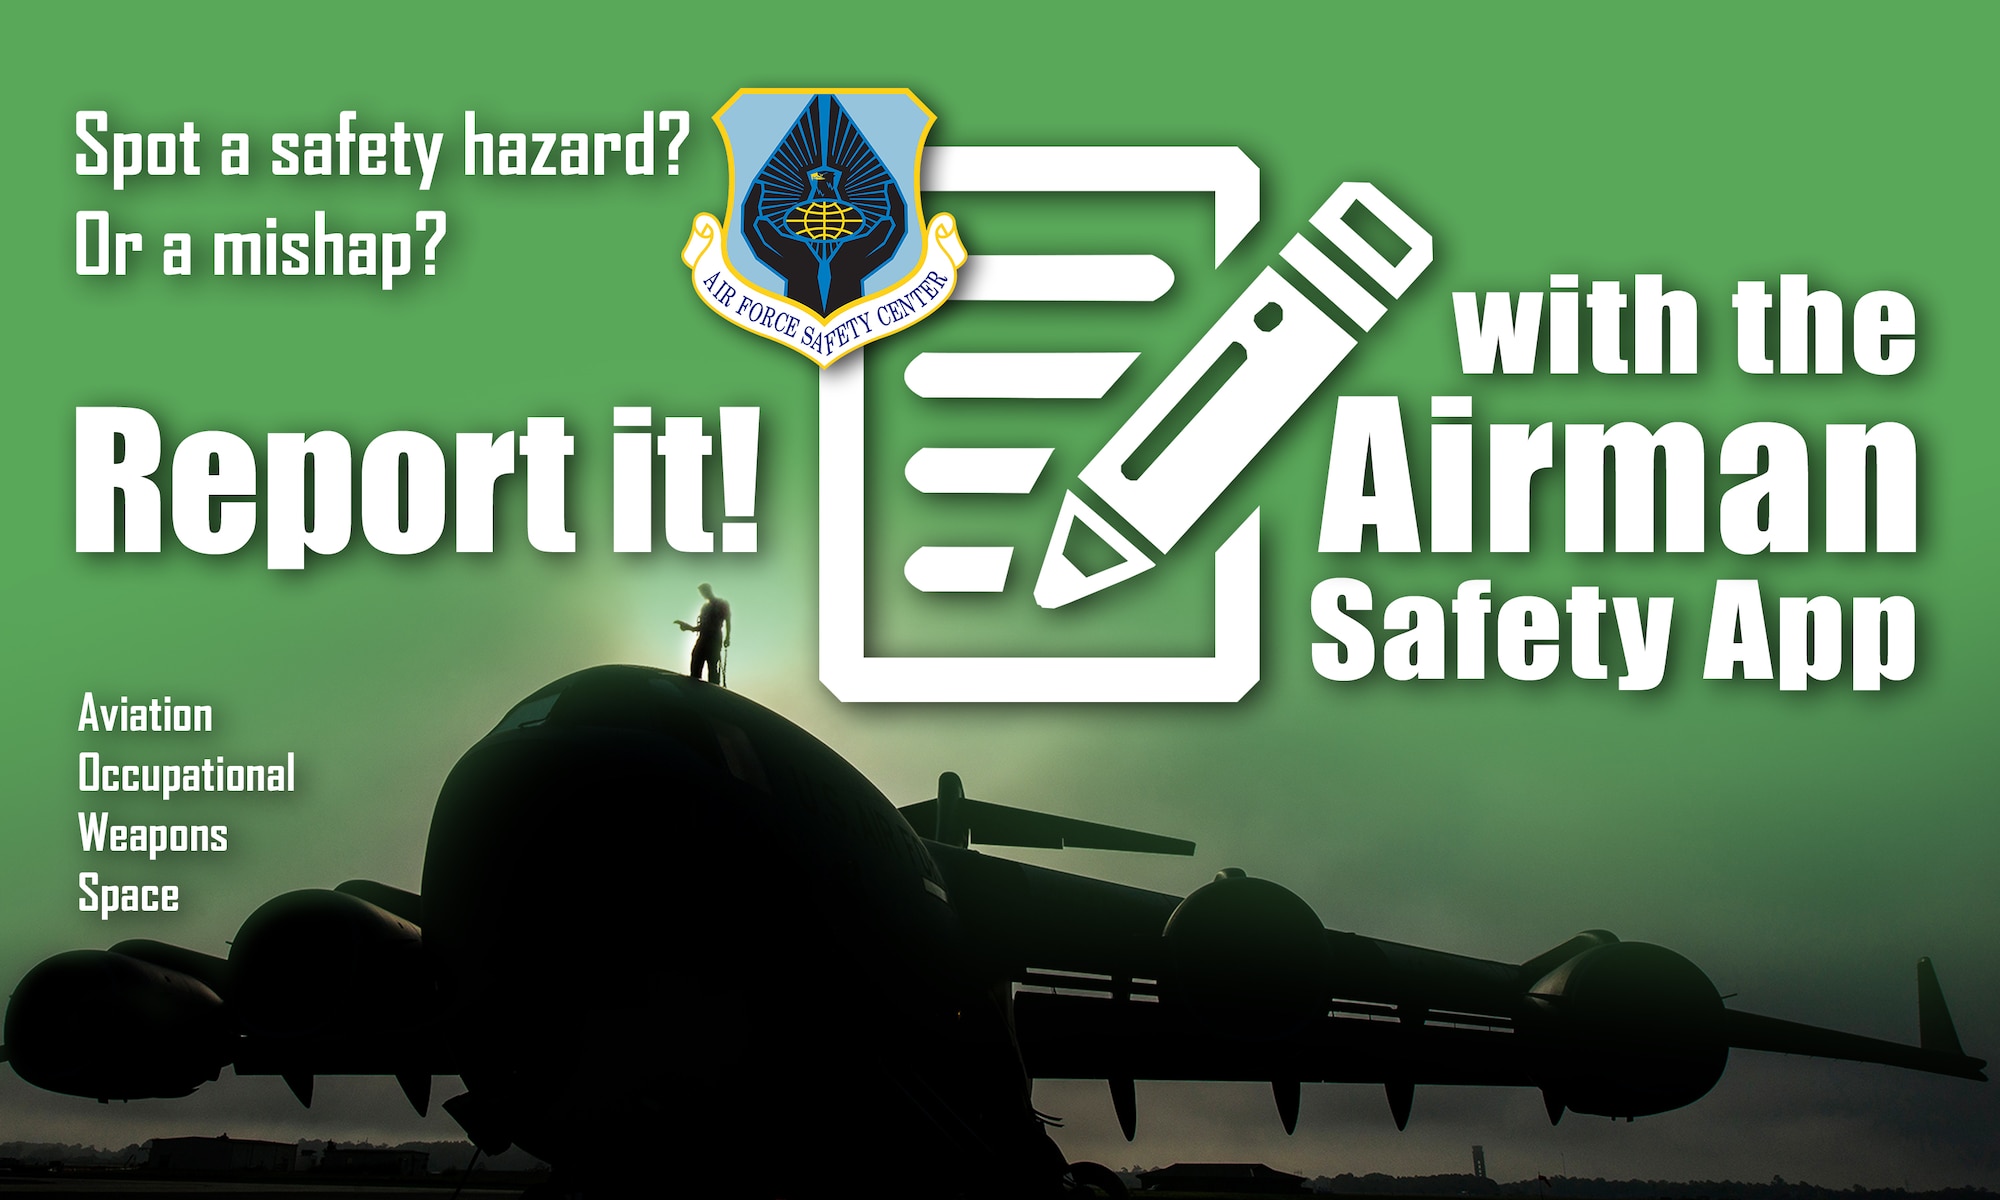 Members of the Hanscom community are now able to report safety issues, whether a hazard or mishap, through a web-based application developed by the Air Force Safety Center. The application, called the Airman Safety App, is located at https://asap.safety.af.mil. (U.S. Air Force graphic by Keith Wright)
